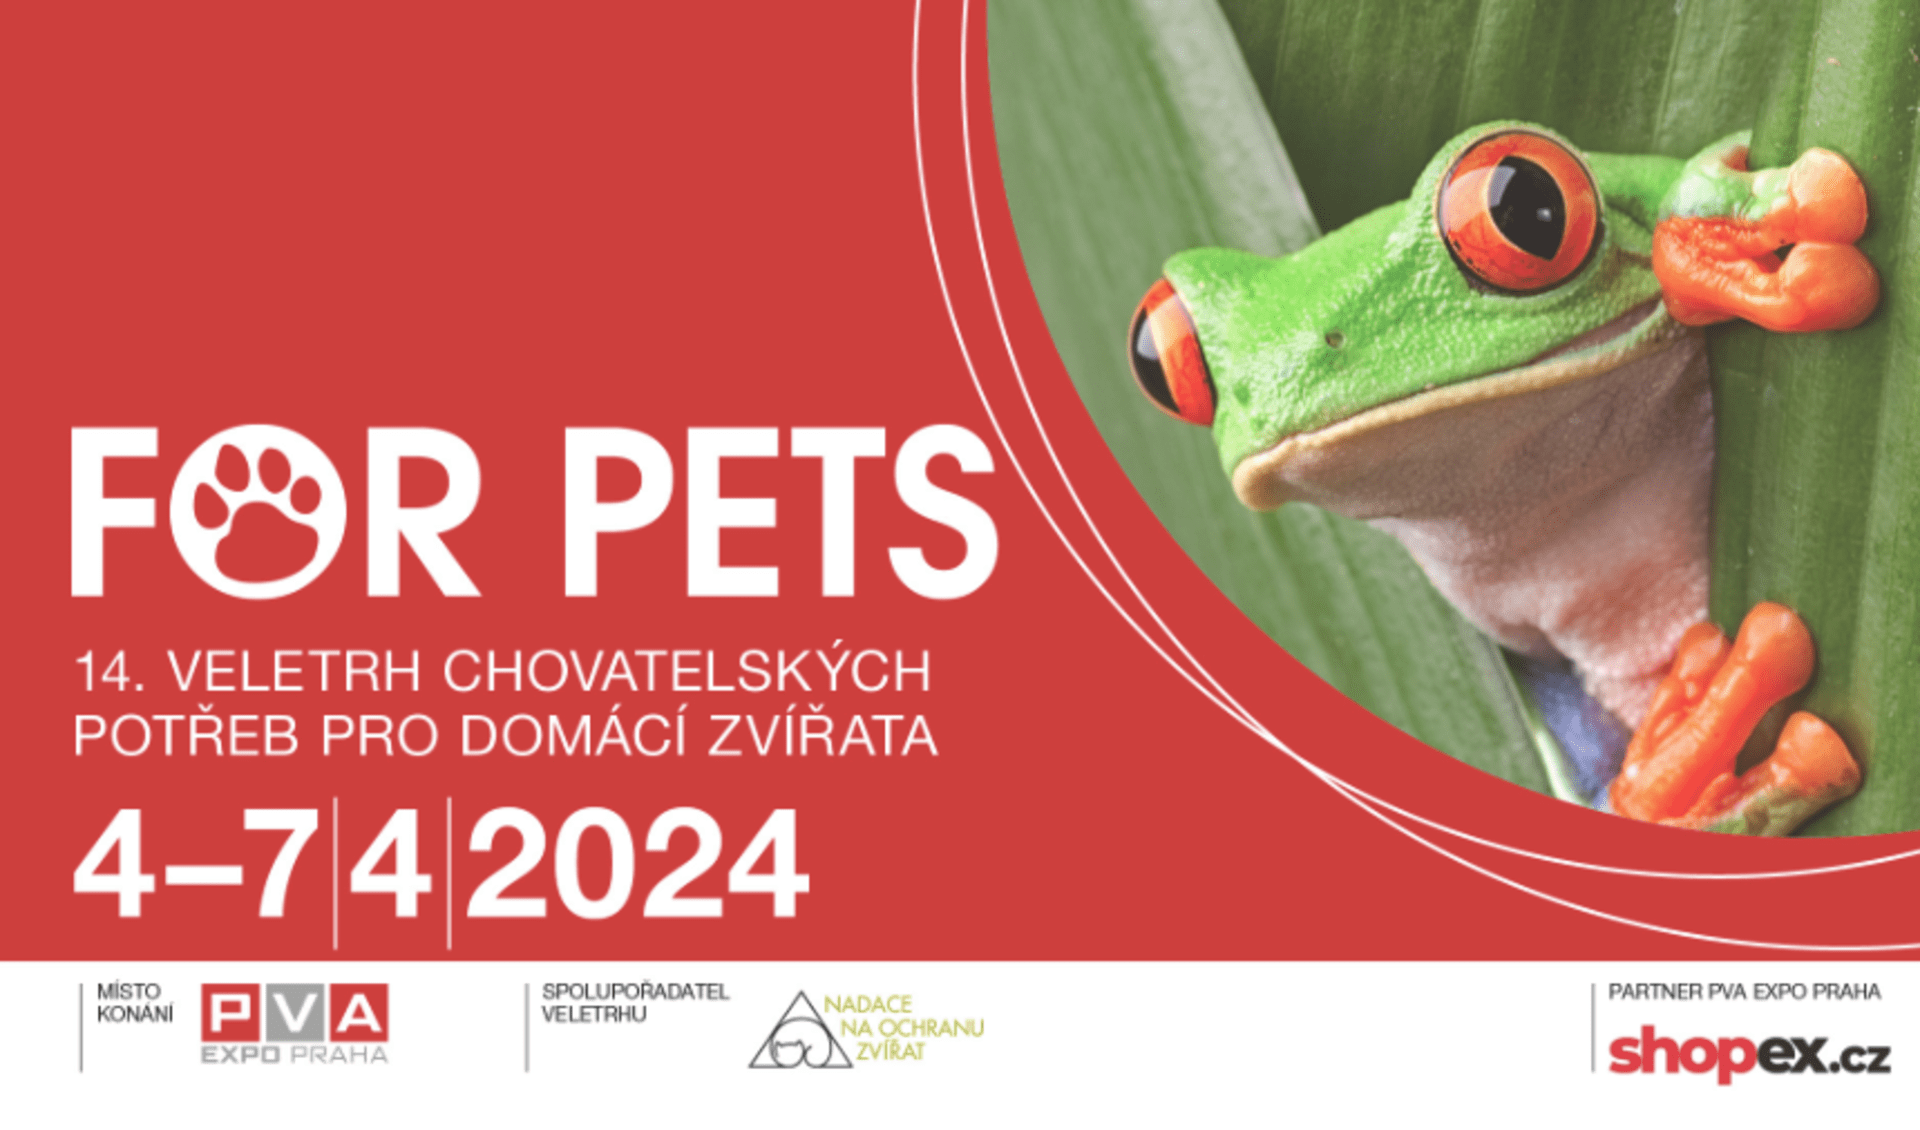 FOR PETS 2024